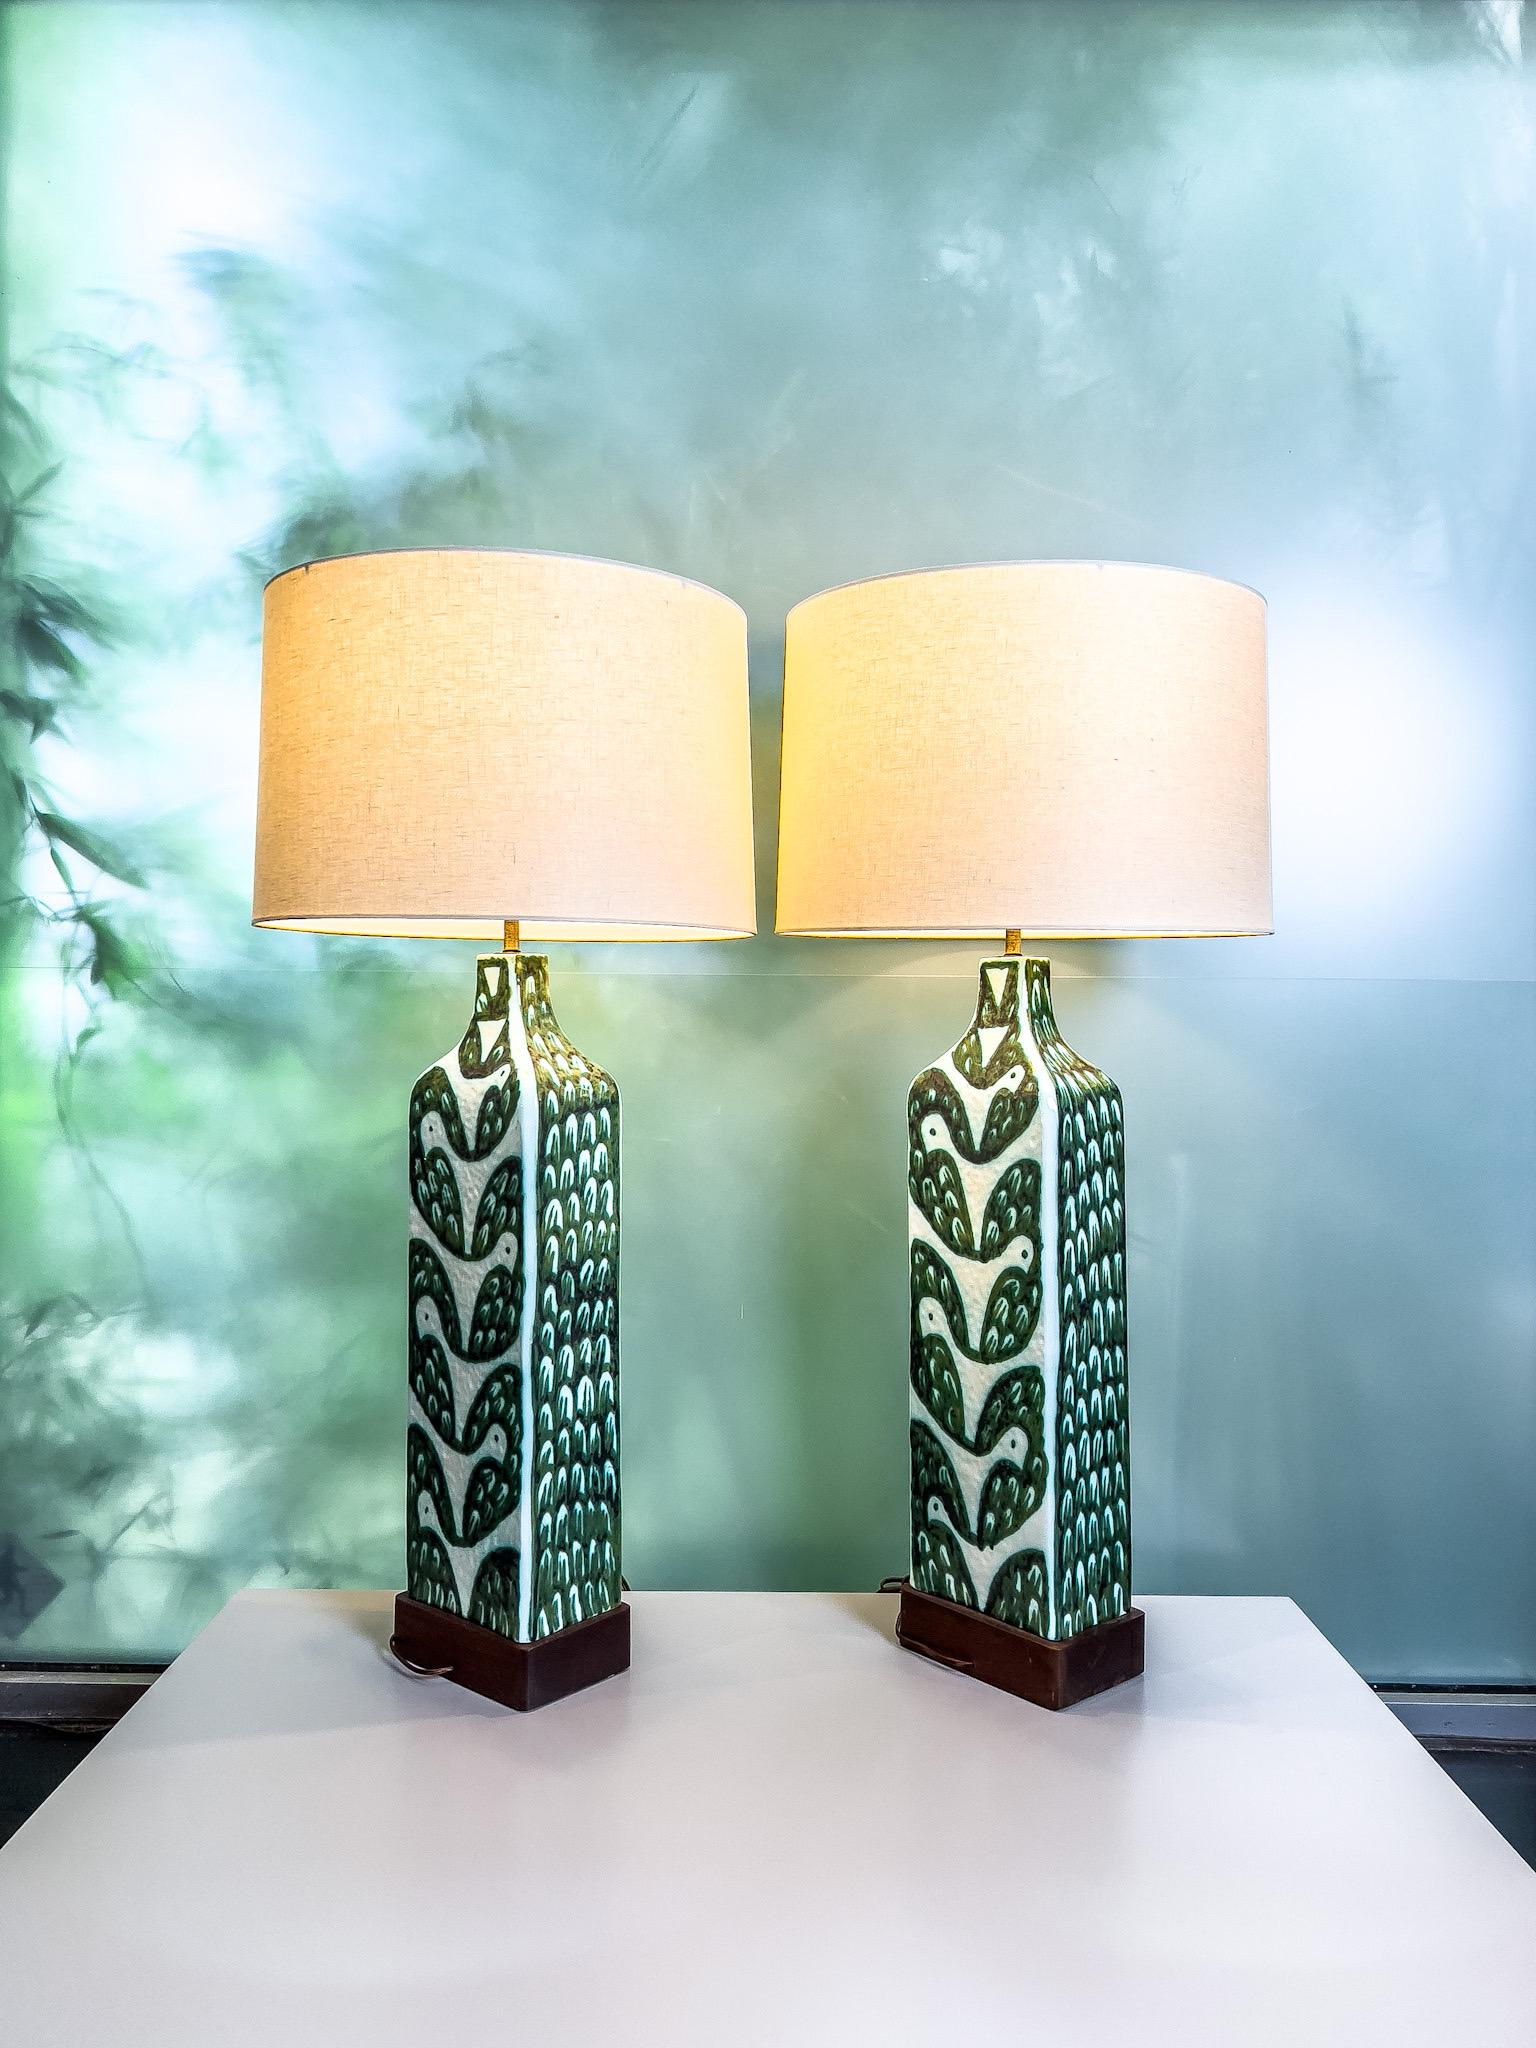 Large Pair of Ceramic Lamps by Alessio Tasca for Raymor For Sale 1